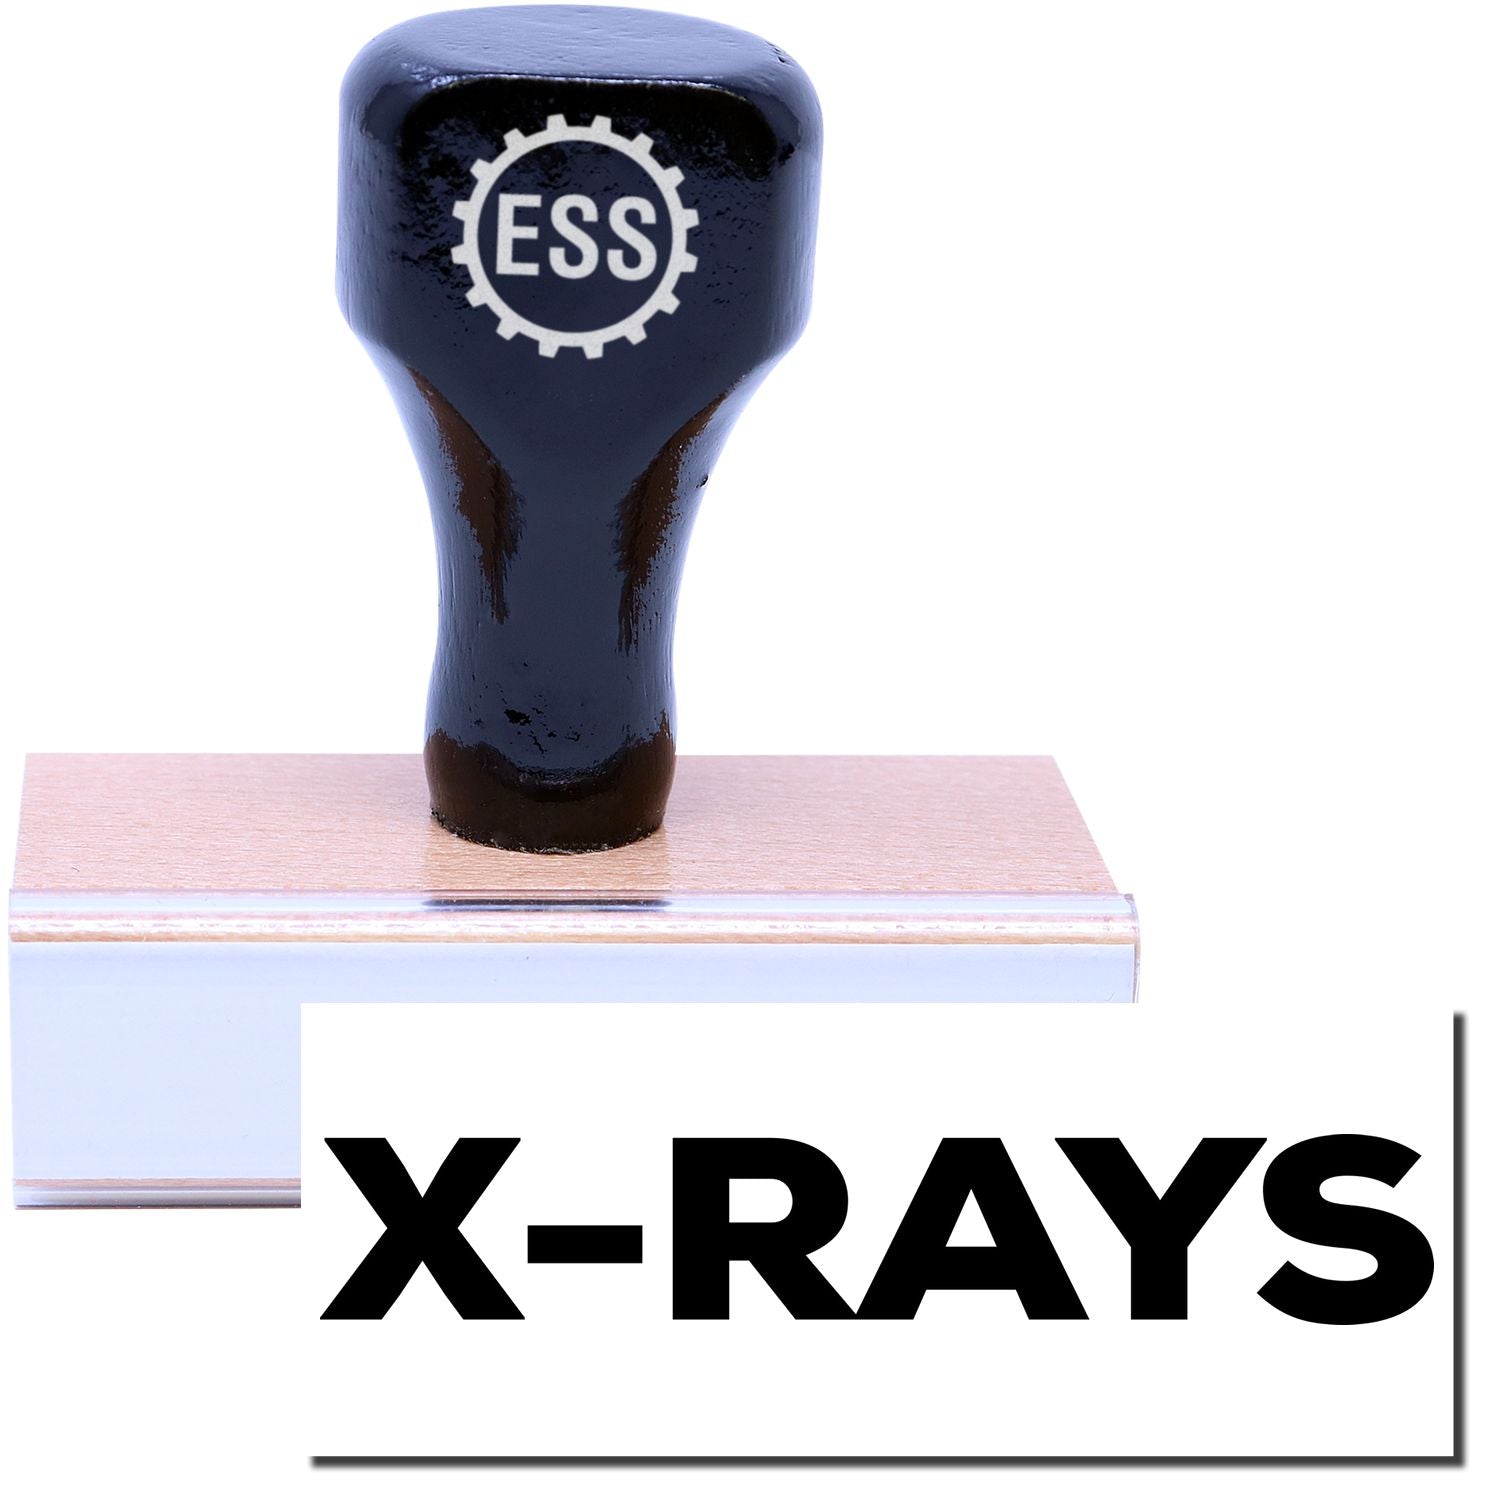 A stock office rubber stamp with a stamped image showing how the text "X-RAYS" in bold font is displayed after stamping.